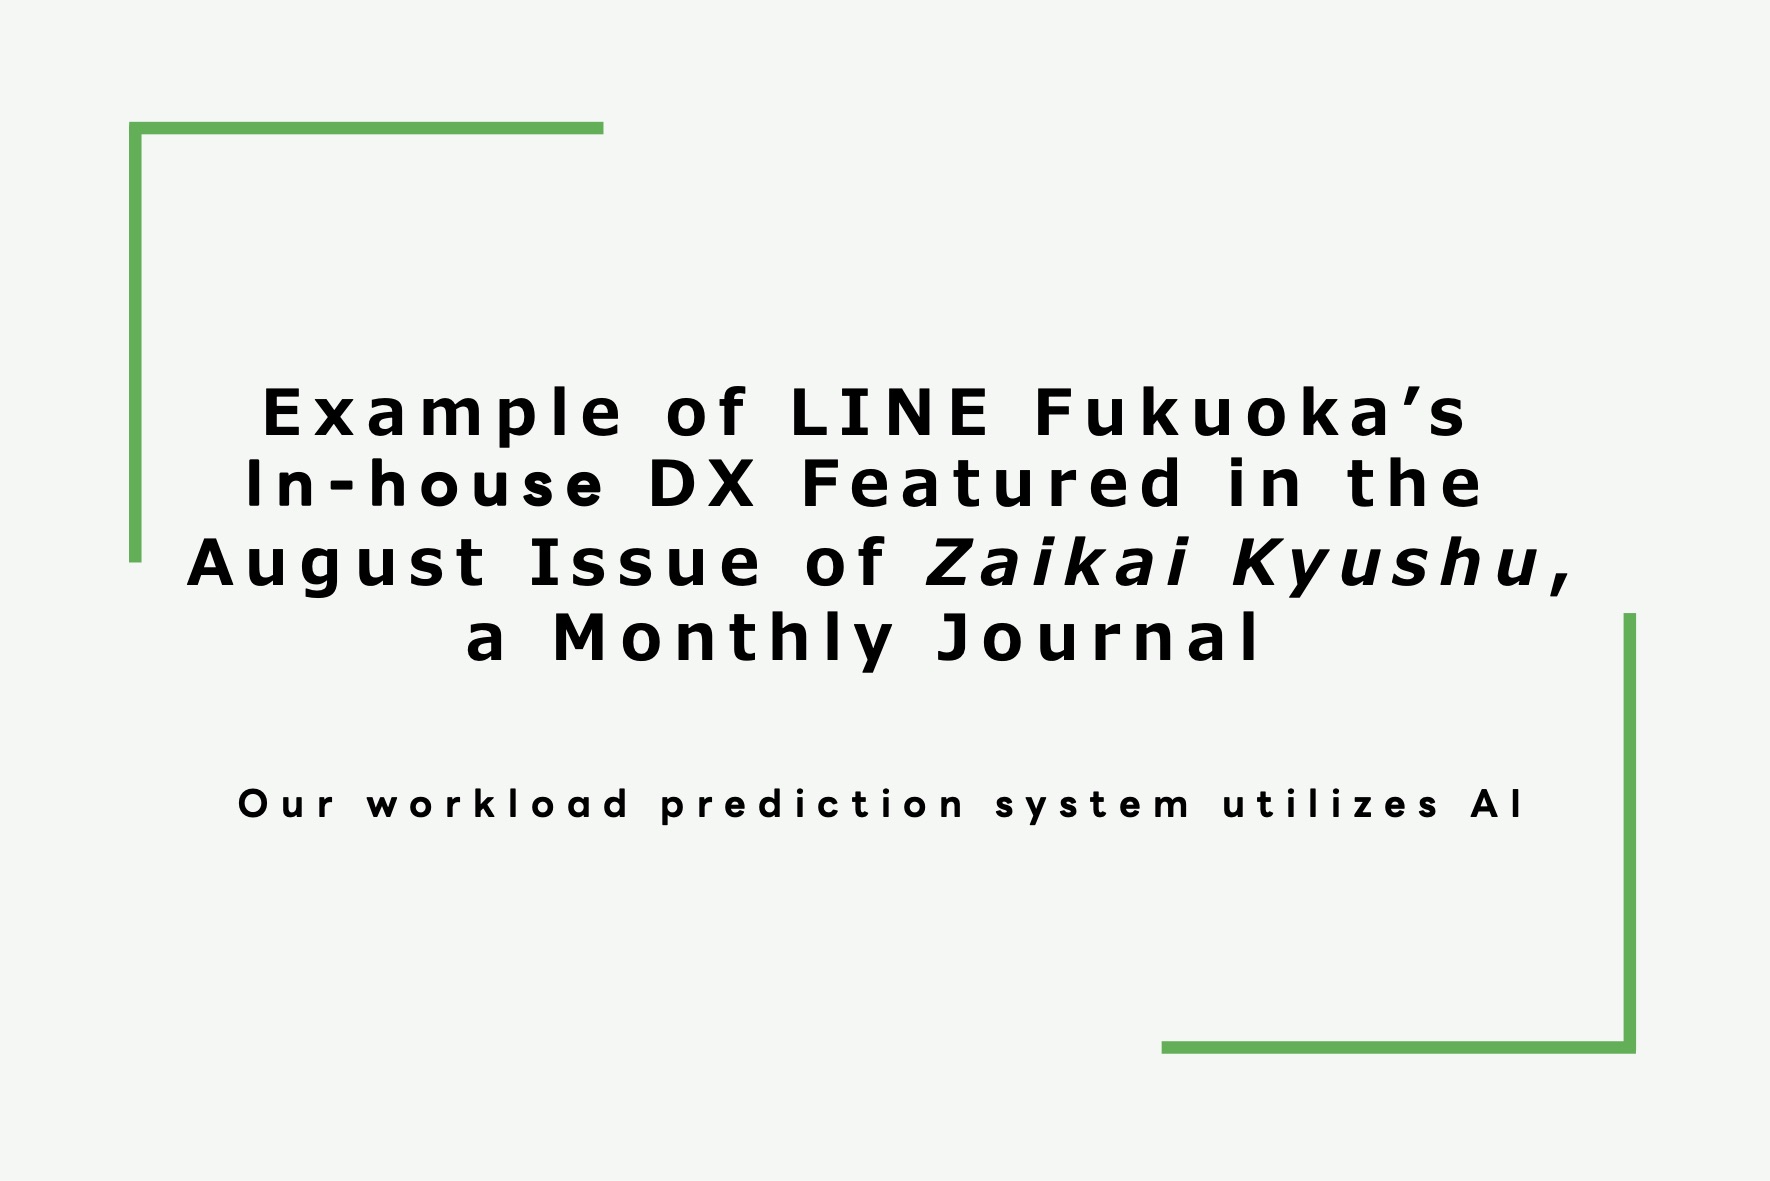 LINE Fukuoka’s DX Case Studies Featured in the August Issue of Zaikai Kyushu, a Monthly Journal サムネイル画像